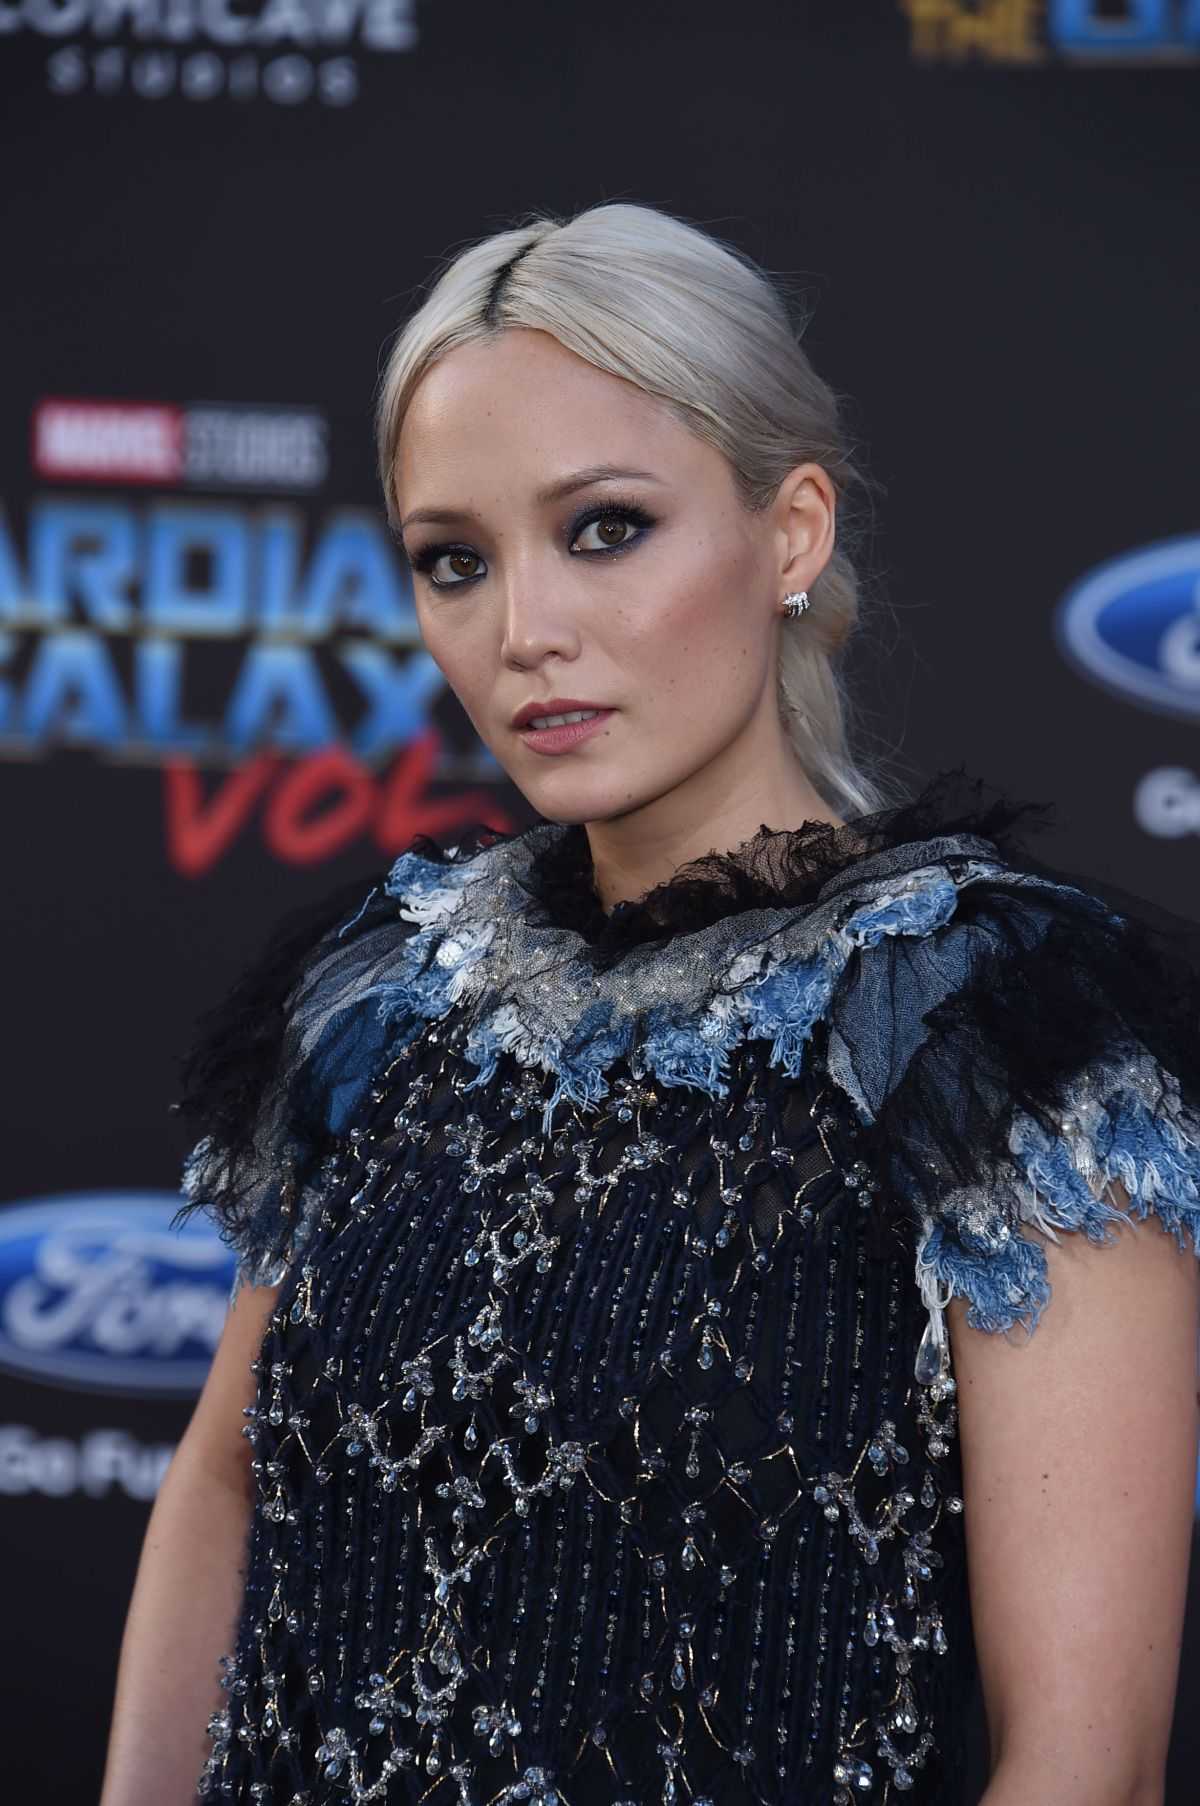 70+ Hot Pictures Of Pom Klementieff Who Plays Mantis In Marvel Cinematic Universe 128